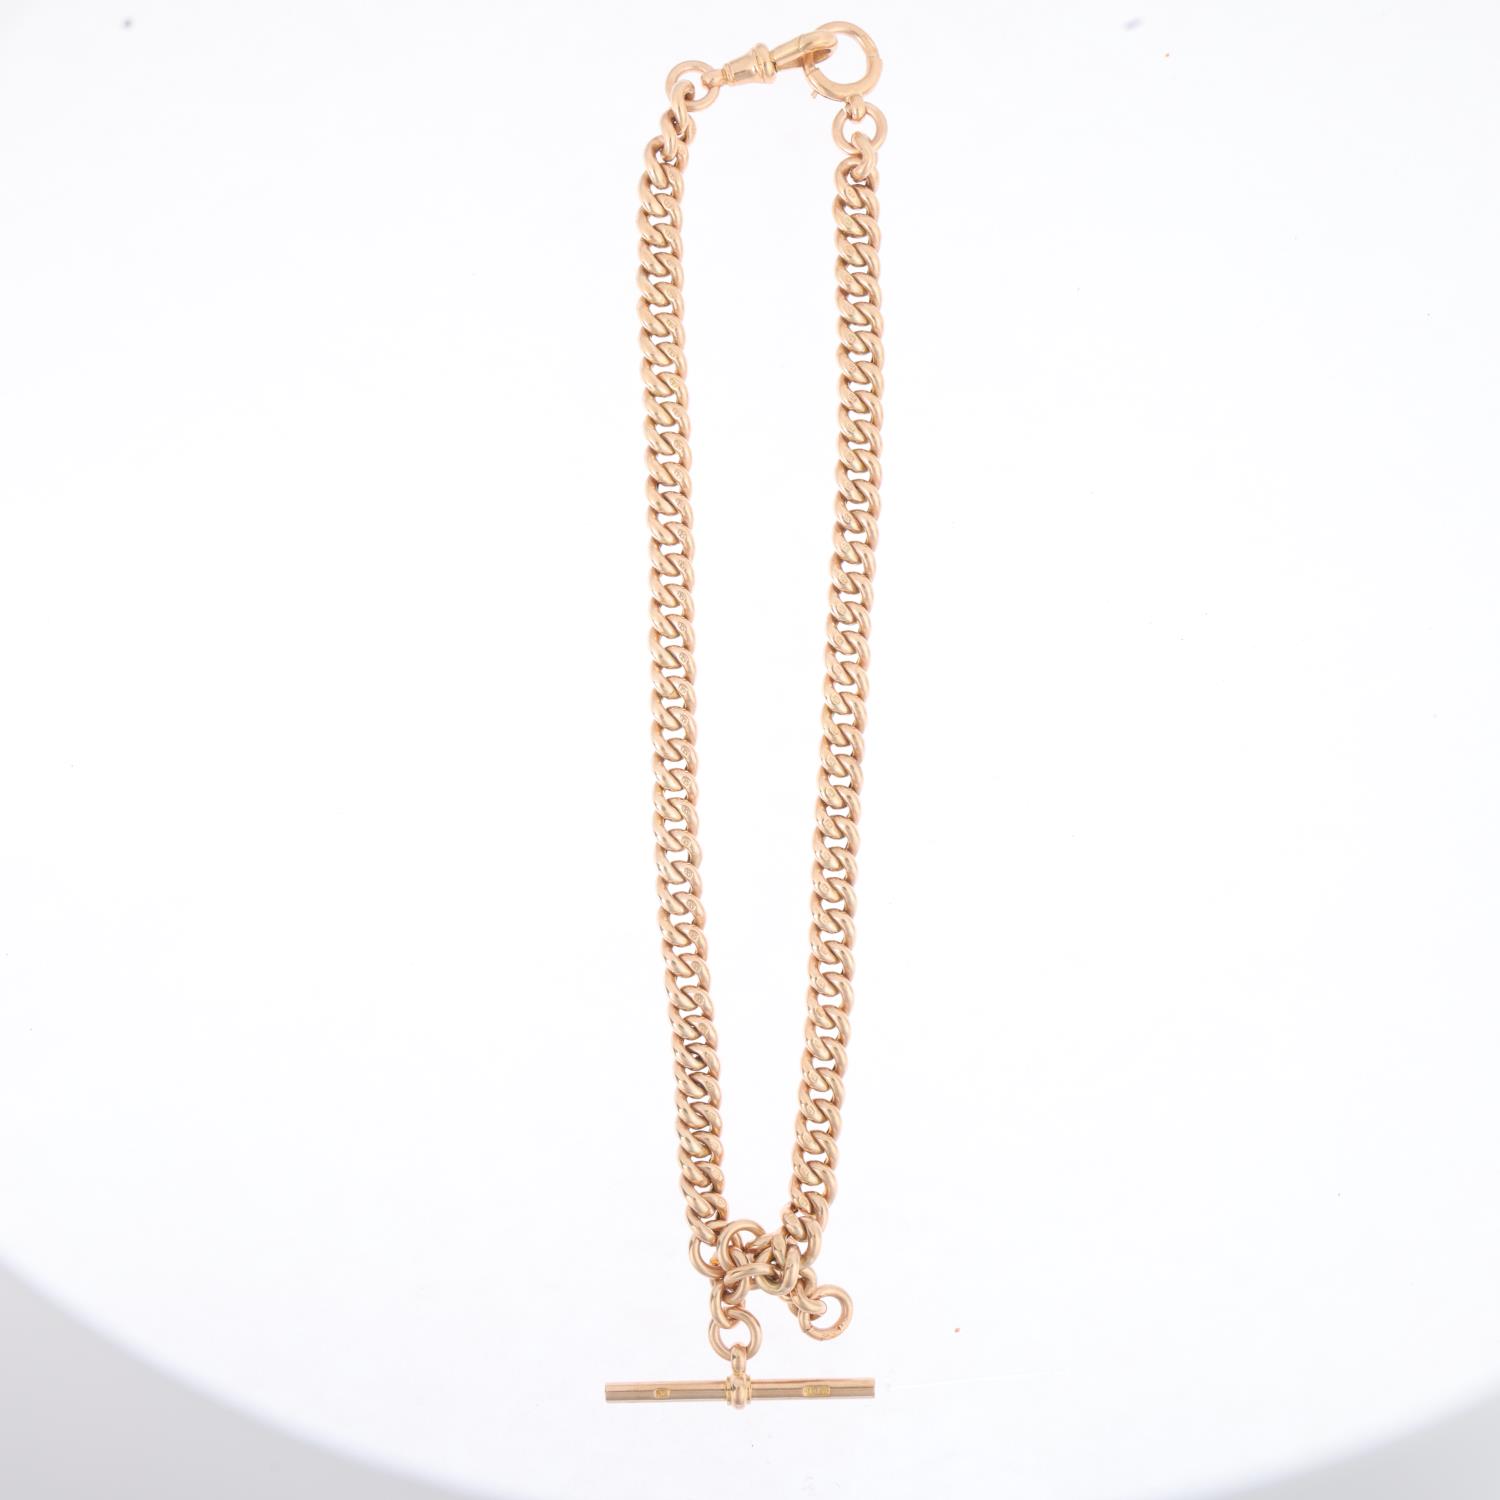 An Antique 9ct gold graduated hollow curb link Albert chain necklace, with 9ct T-bar dog clip and - Image 2 of 4